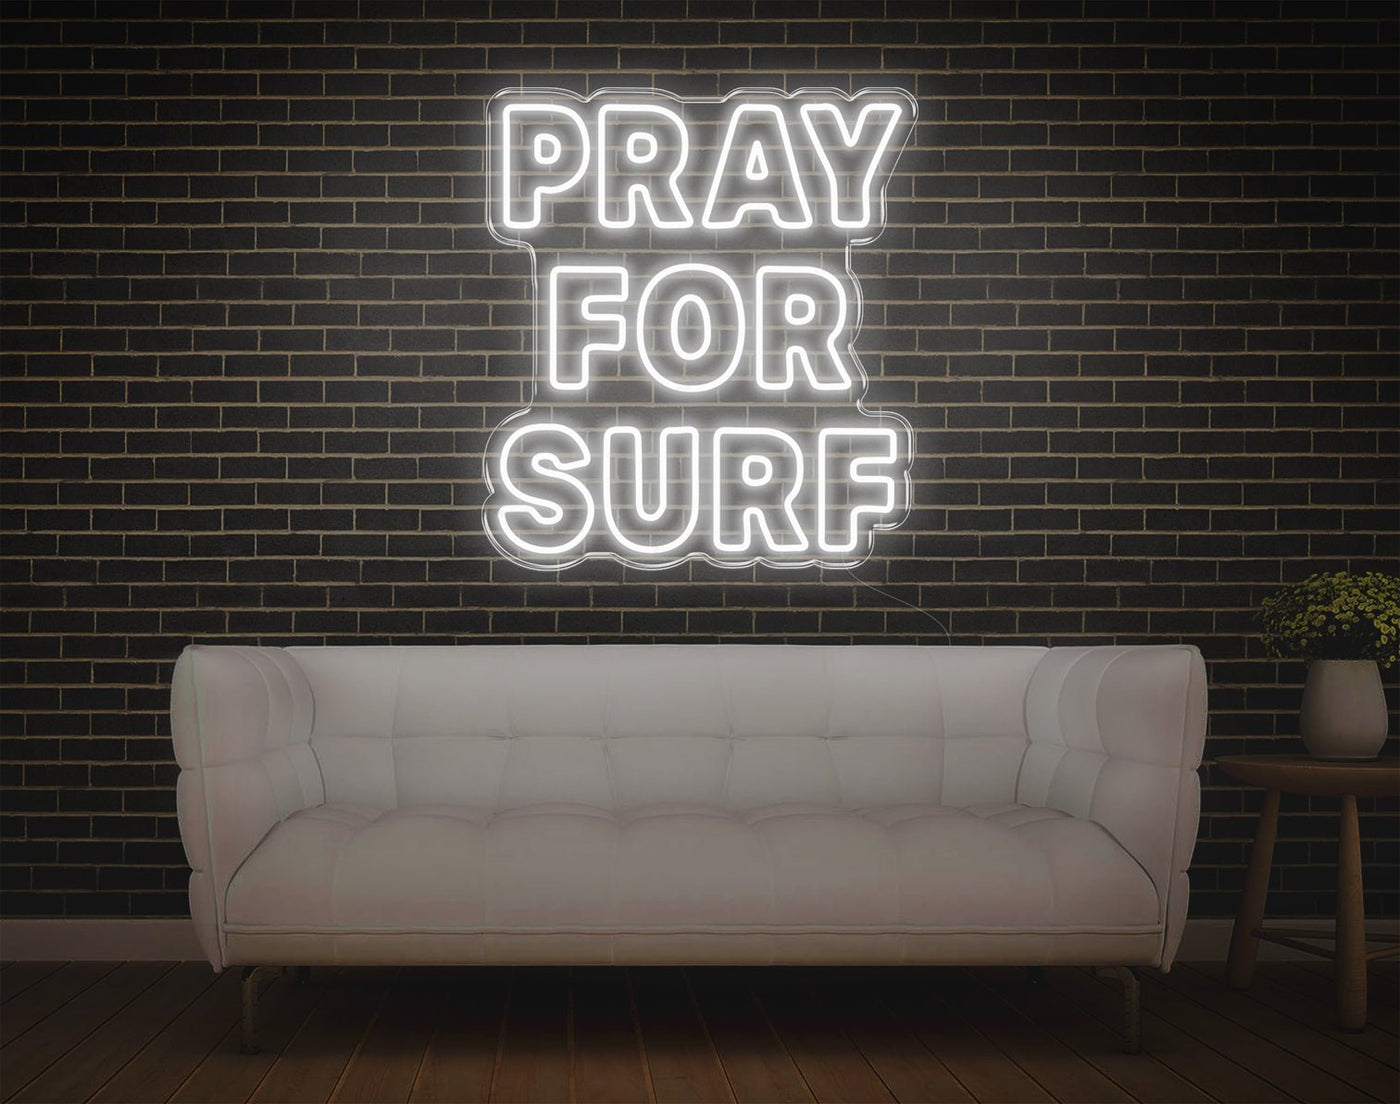 Pray For Surf LED Neon Sign v2 - 24inch x 21inchHot Pink